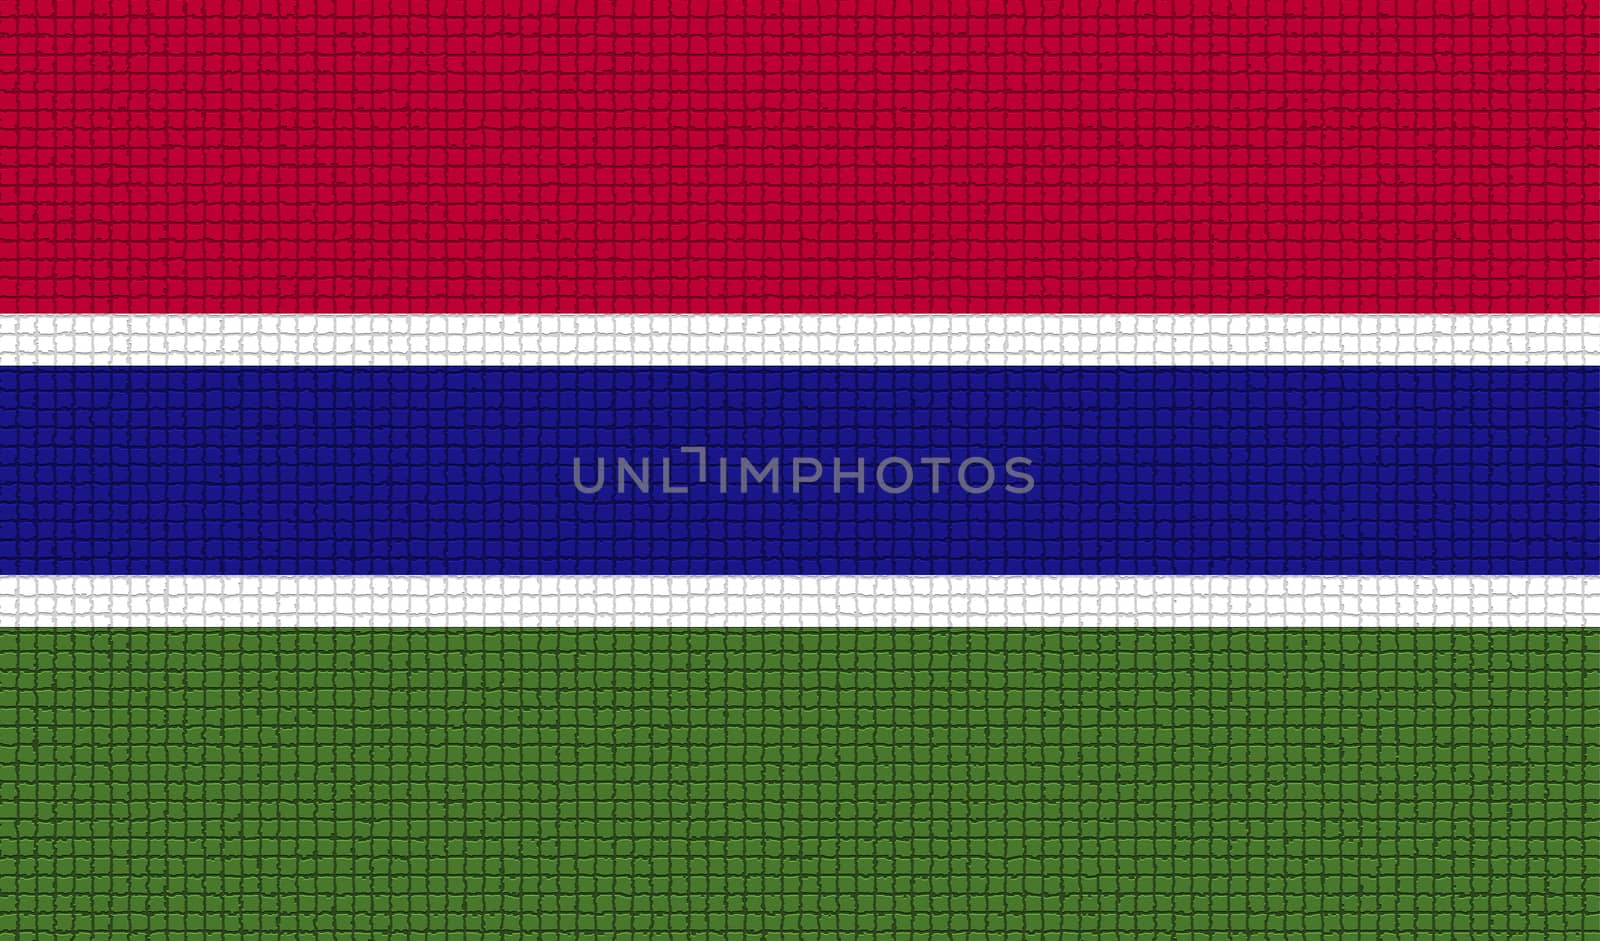 Flags of Gambia with abstract textures. Rasterized version